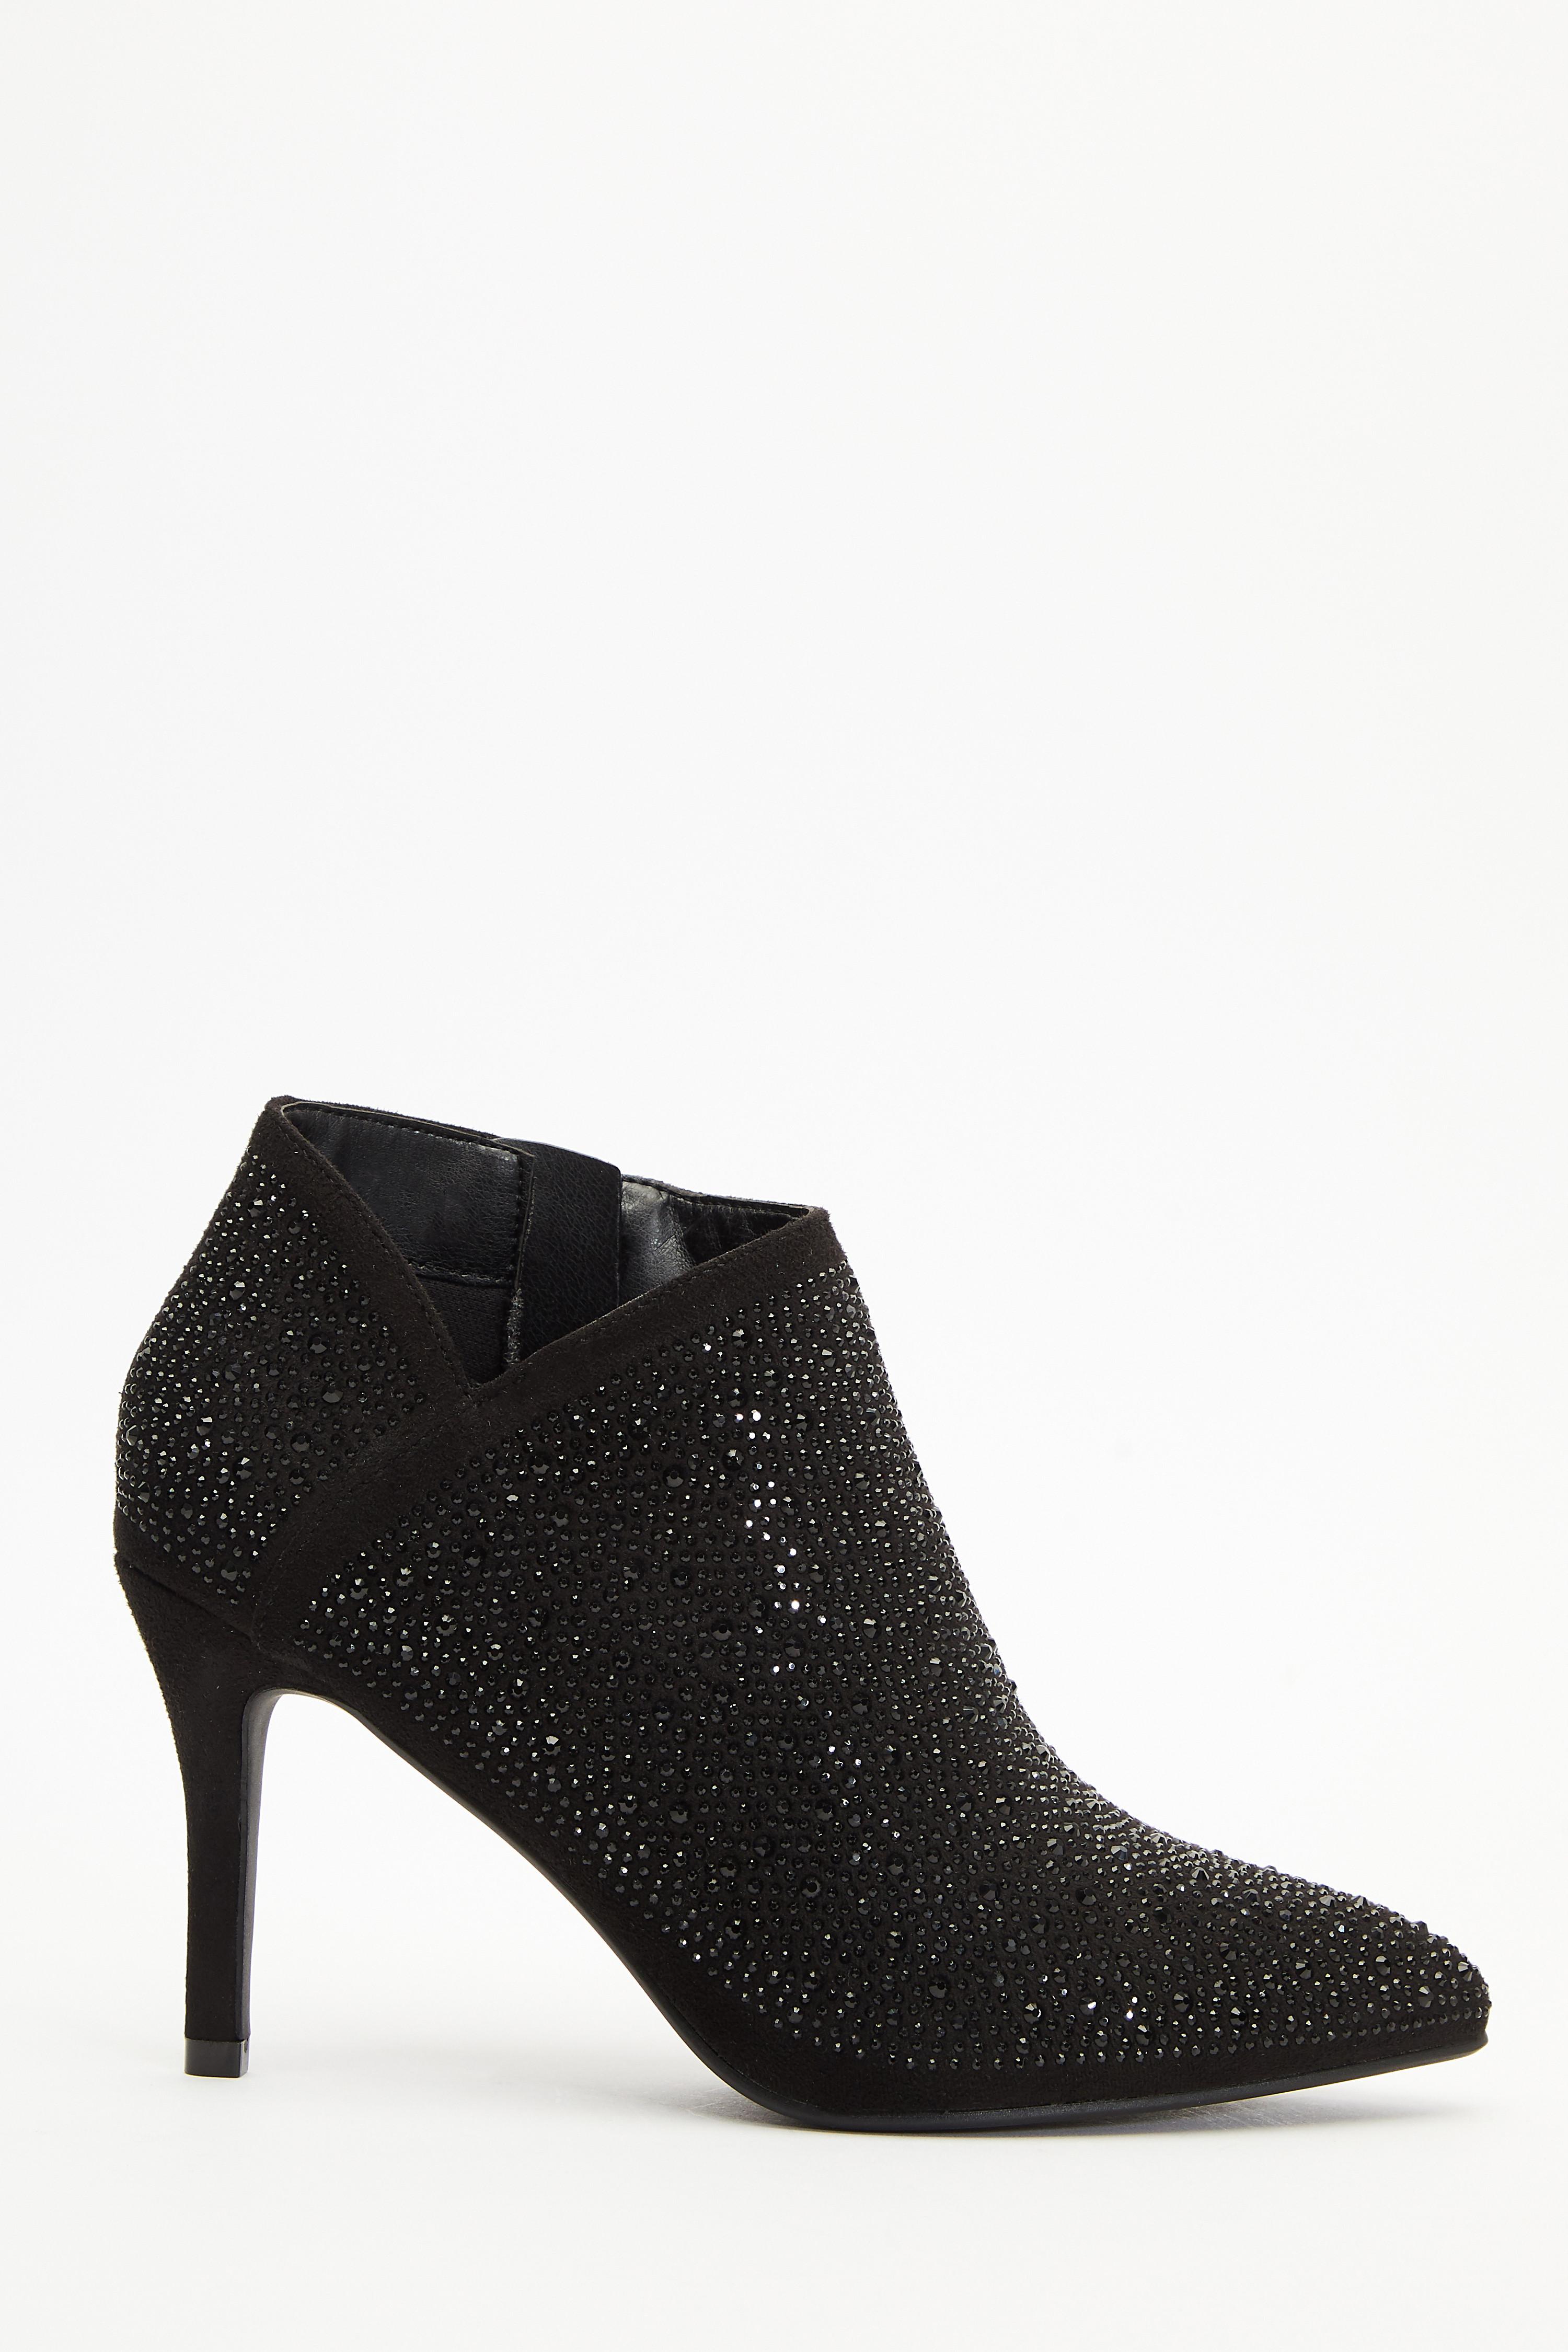 Sparkly Shoes Low Heel | vlr.eng.br